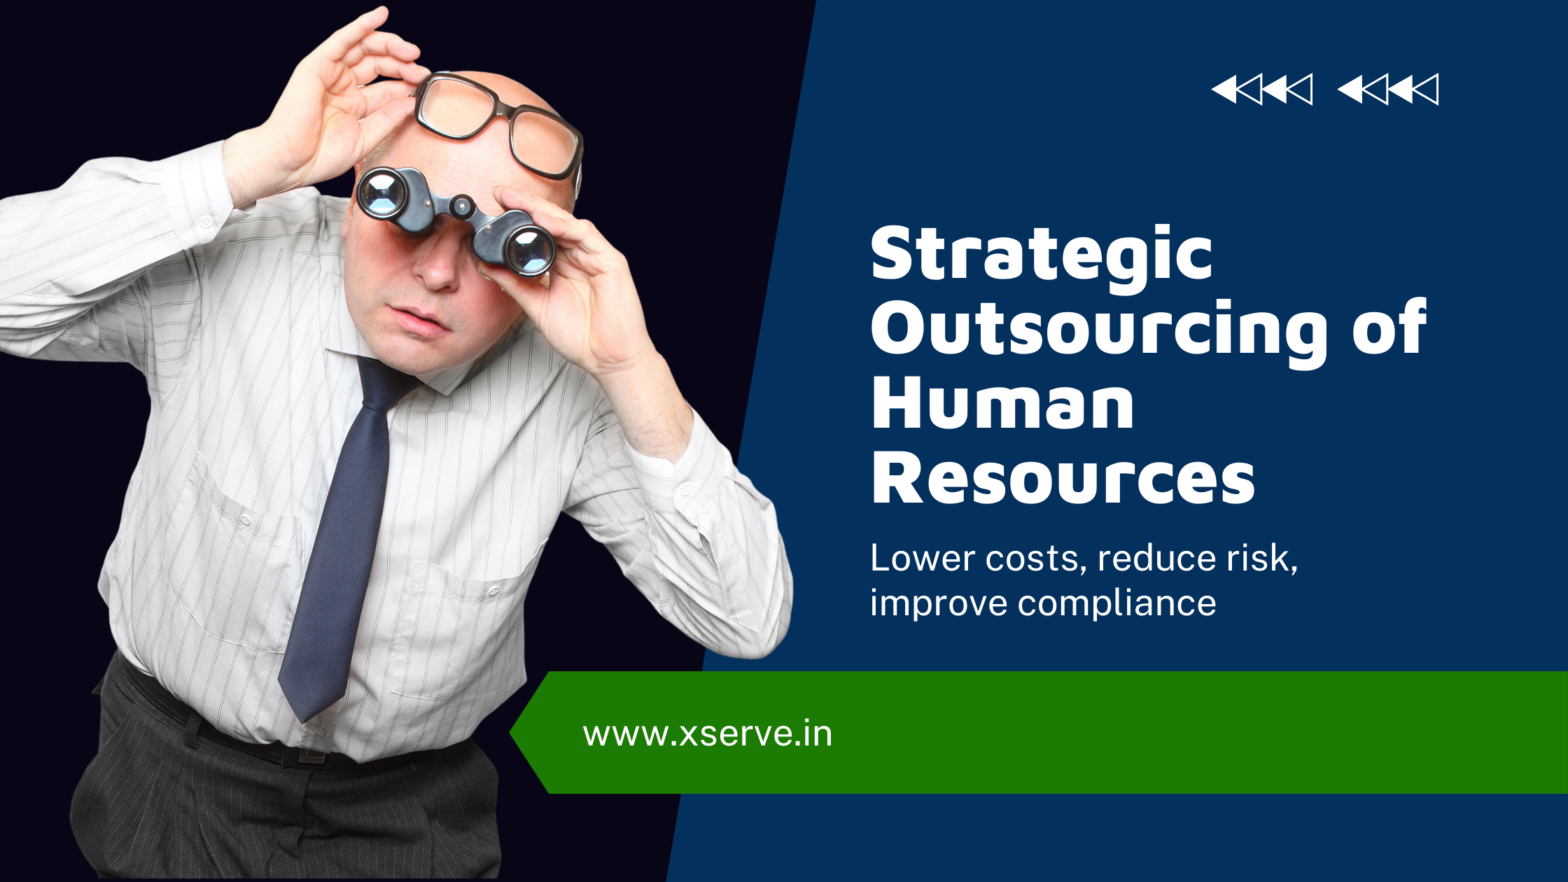 what are the benefits of outsourcing of human resources